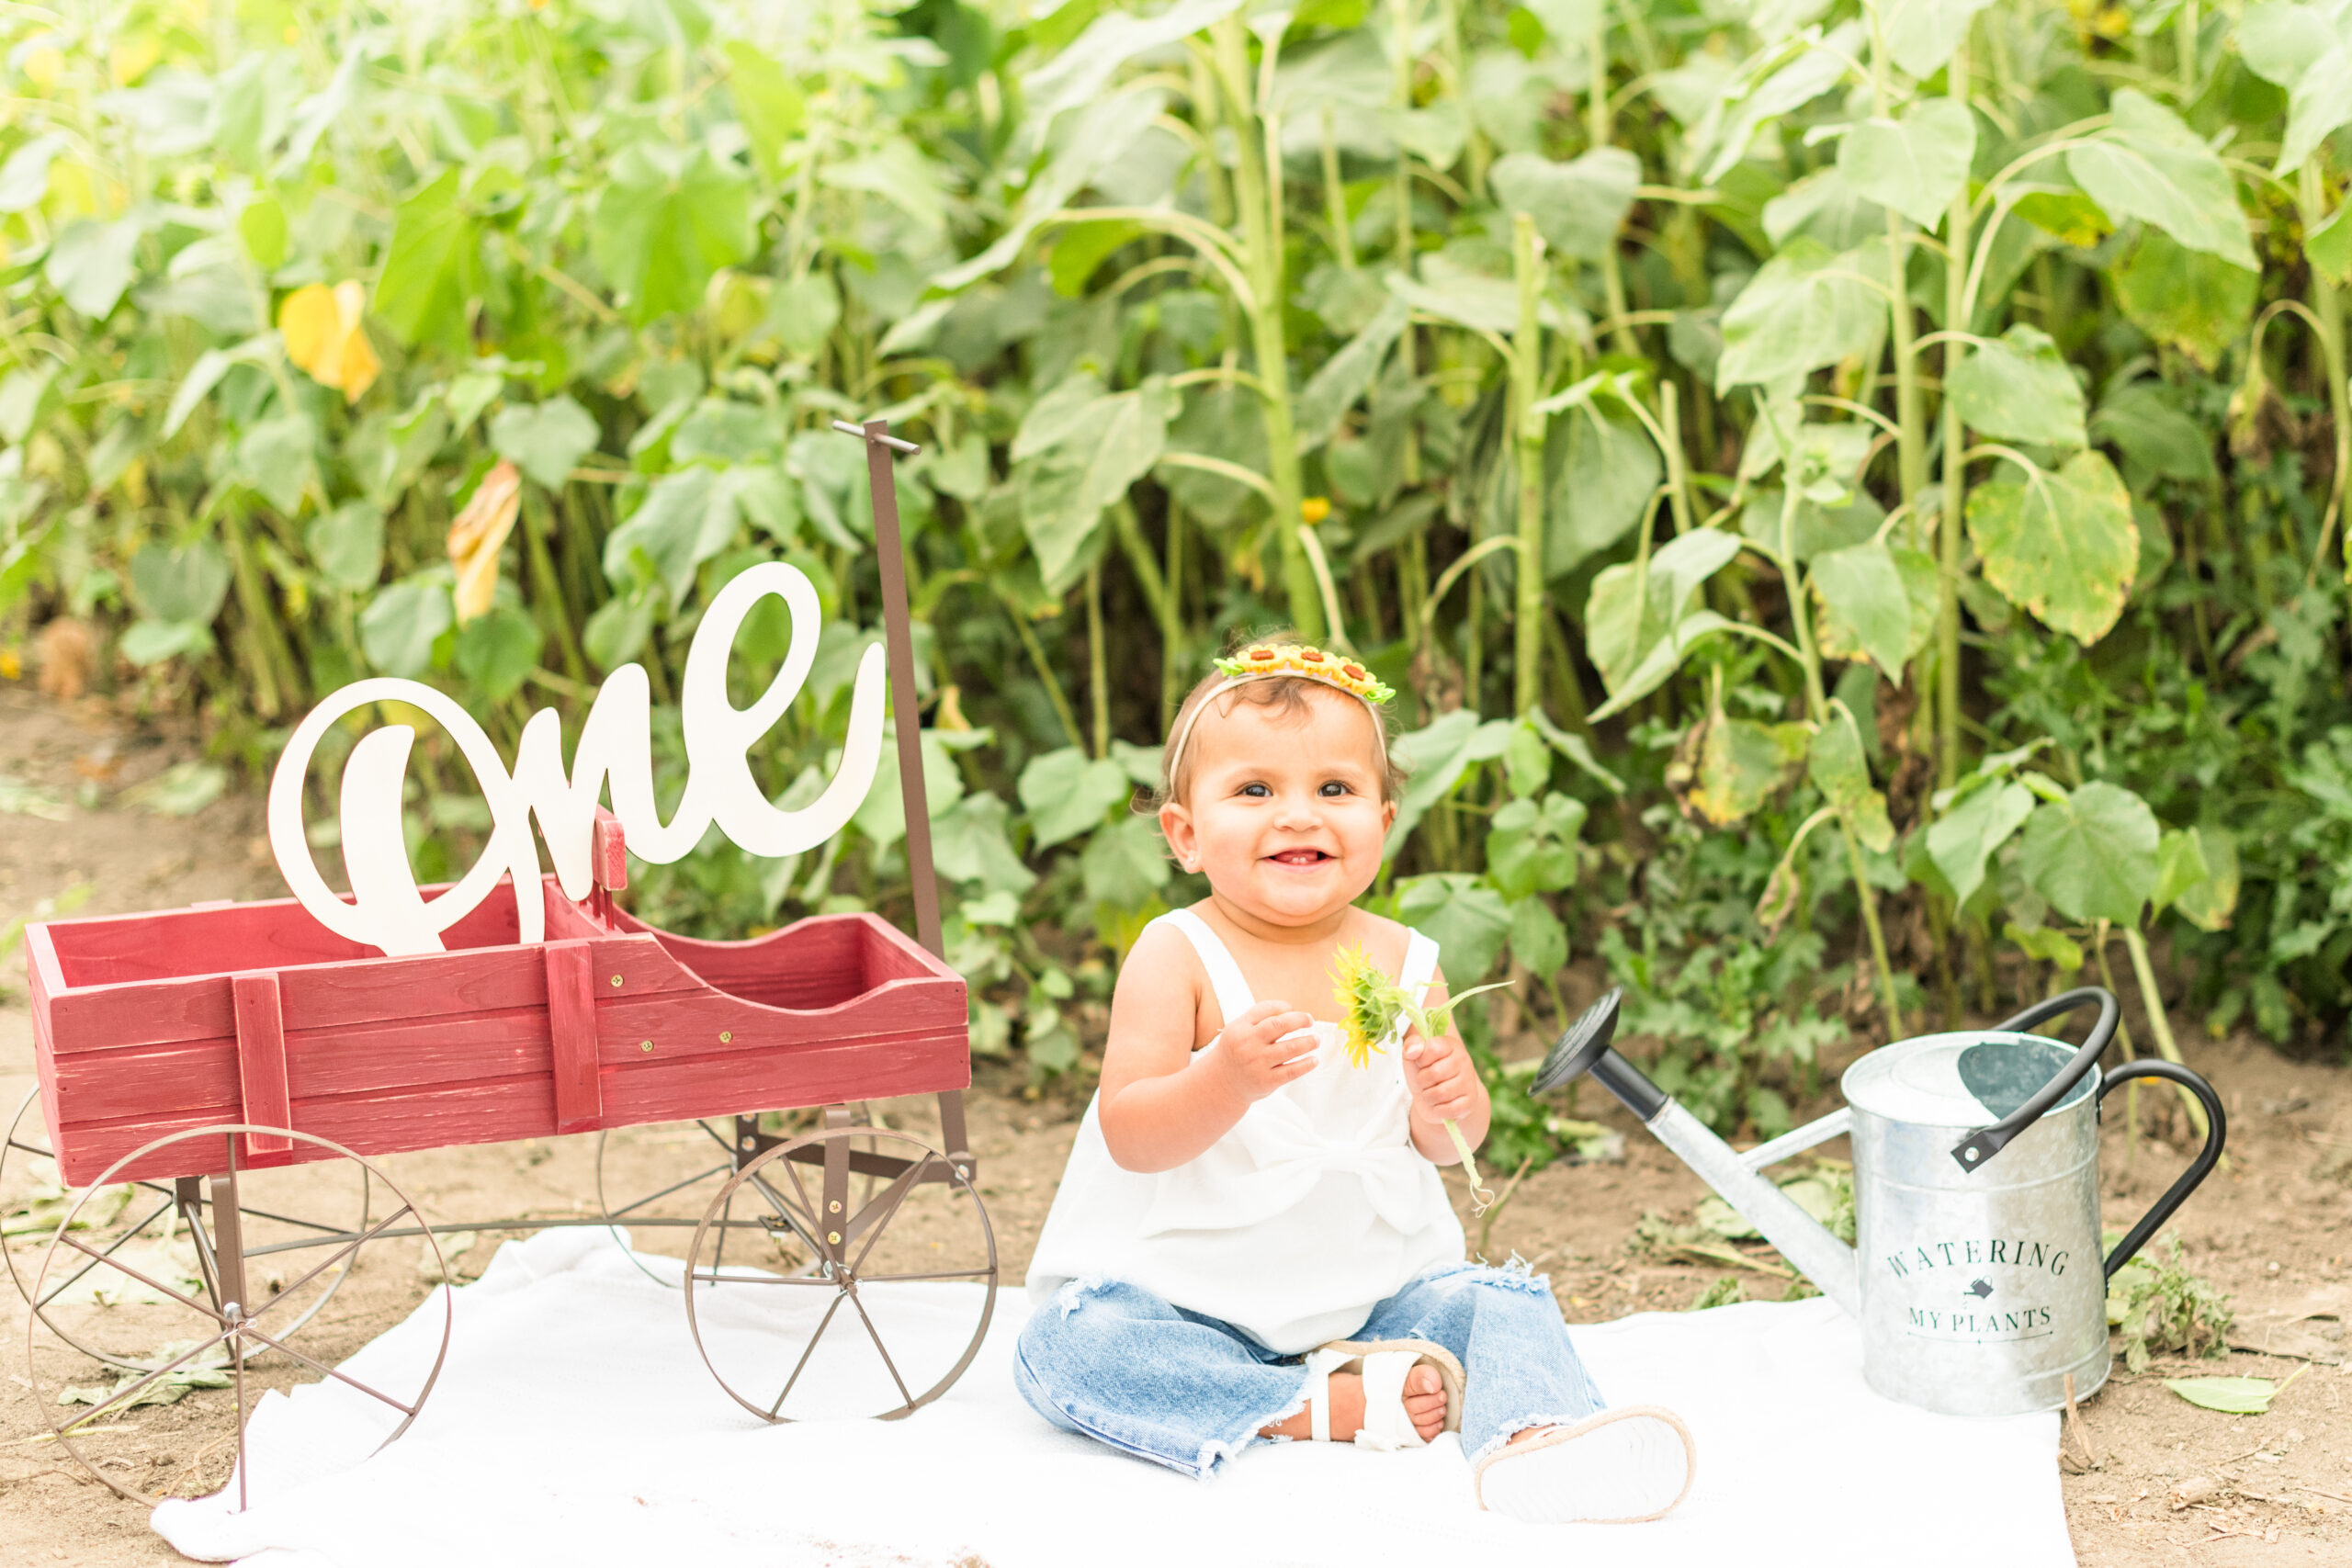 beautiful 1 year old baby girl smiling while sitting on ground in a sunflower field with a year old sign a red wagon and a watering can